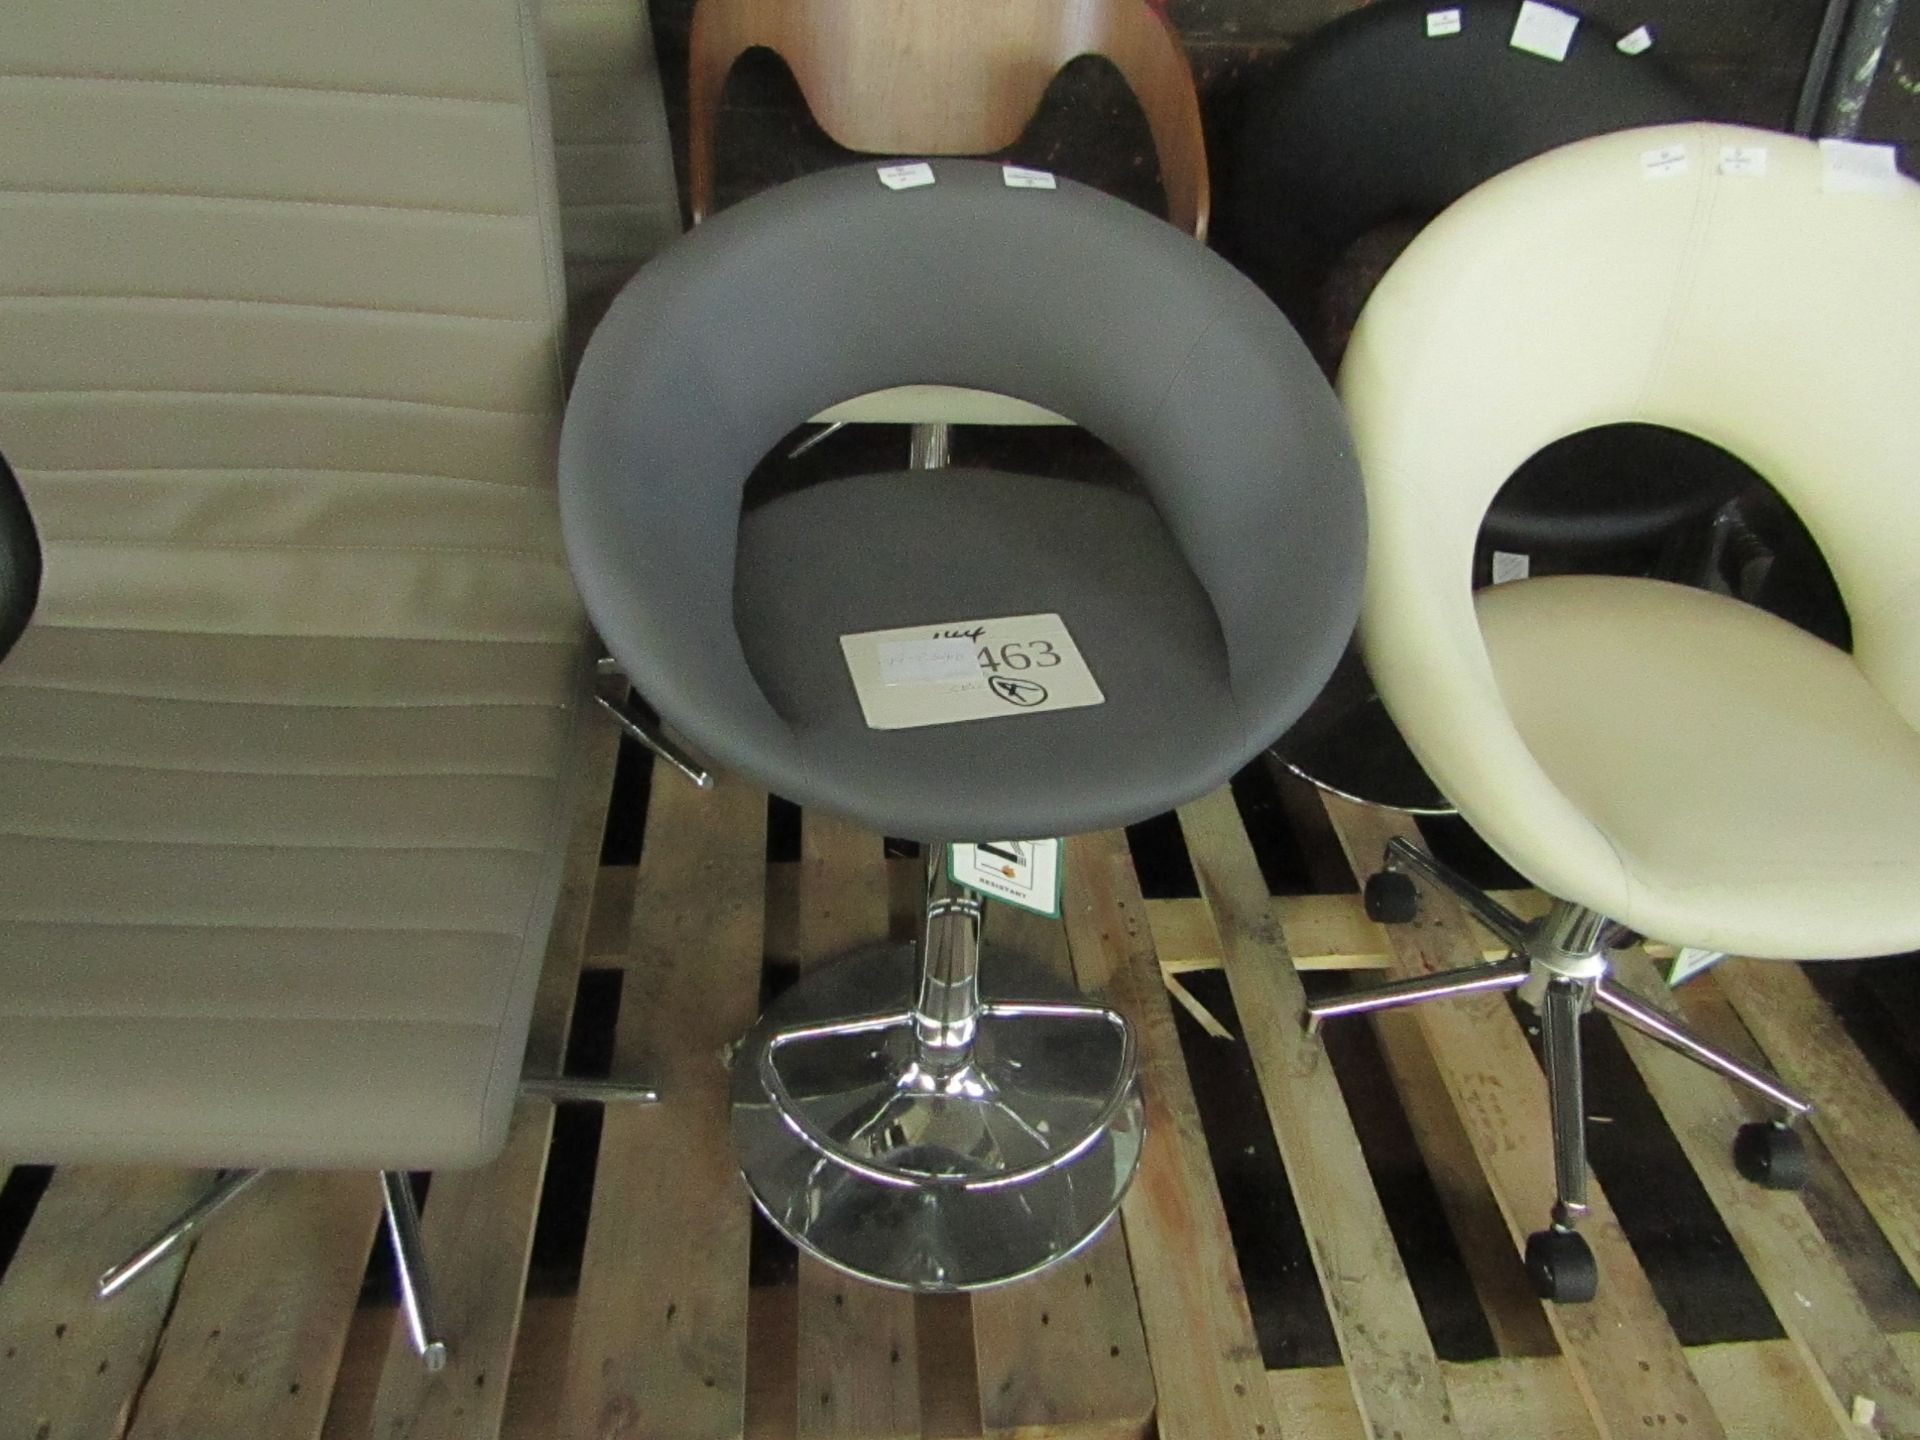 1 x Dwell Tenti bar stool grey RRP £164.00 SKU DWE-AP-112463 TOTAL RRP £164 This lot is a completely